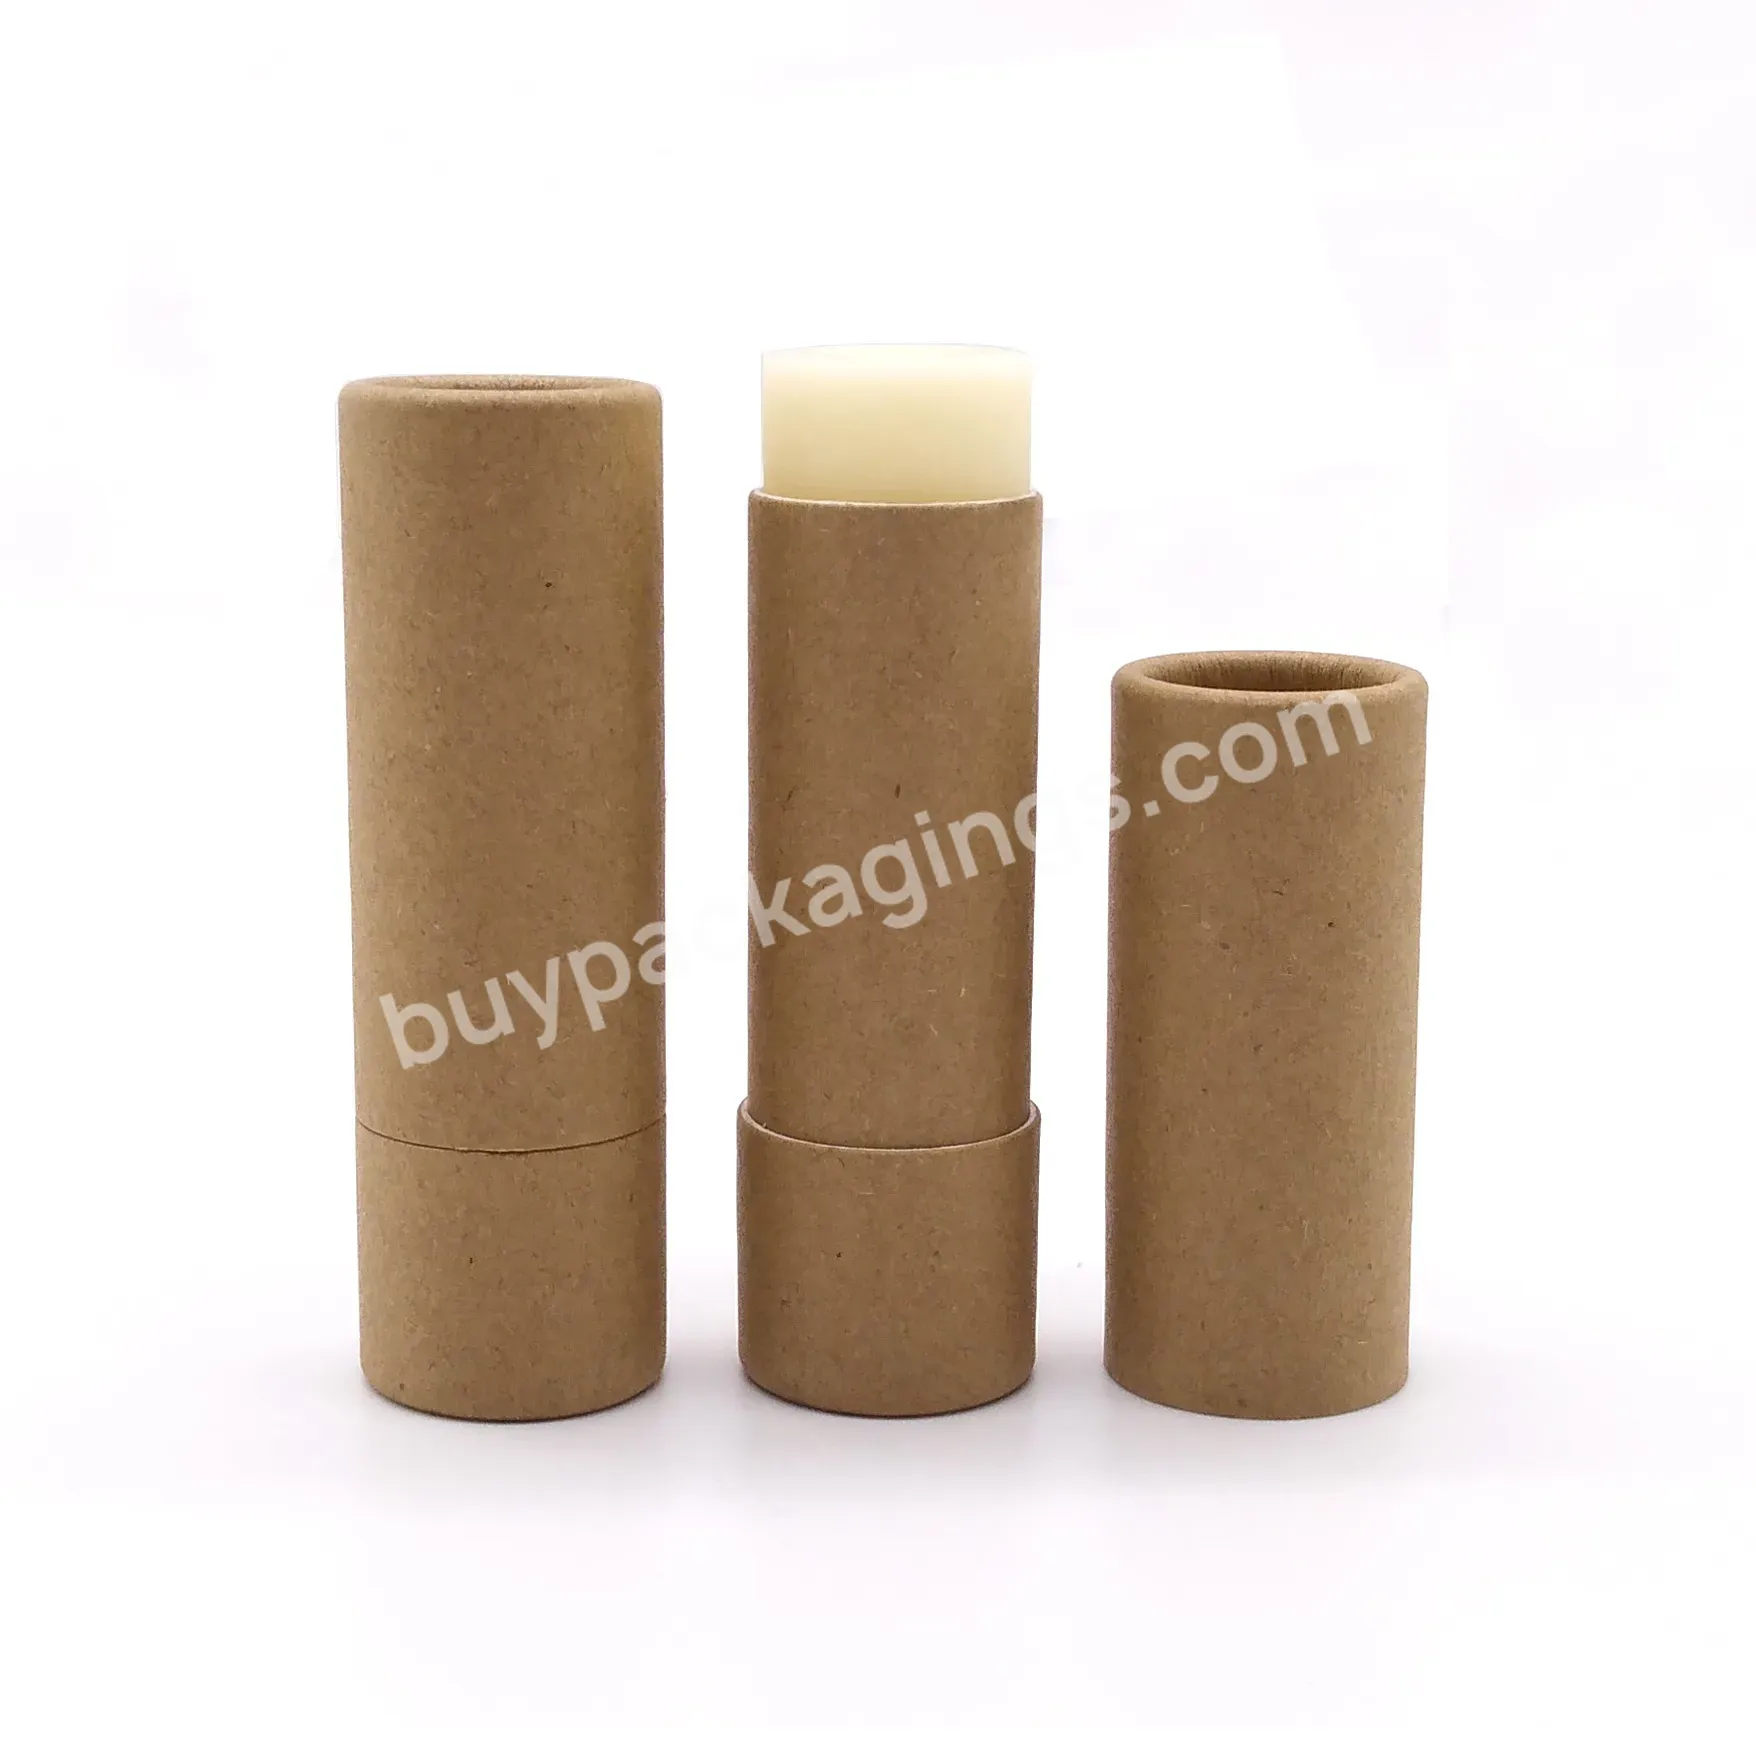 Customized Lipstick Cardboard Containers Biodegradable Empty Fancy Cbd Lip Balm Packaging Pink White Black Kraft Paper Tubes - Buy Push Up Paper Tubes Lip Balm,Cardboard Lip Balm Tubes,Empty Lip Balm Tube.